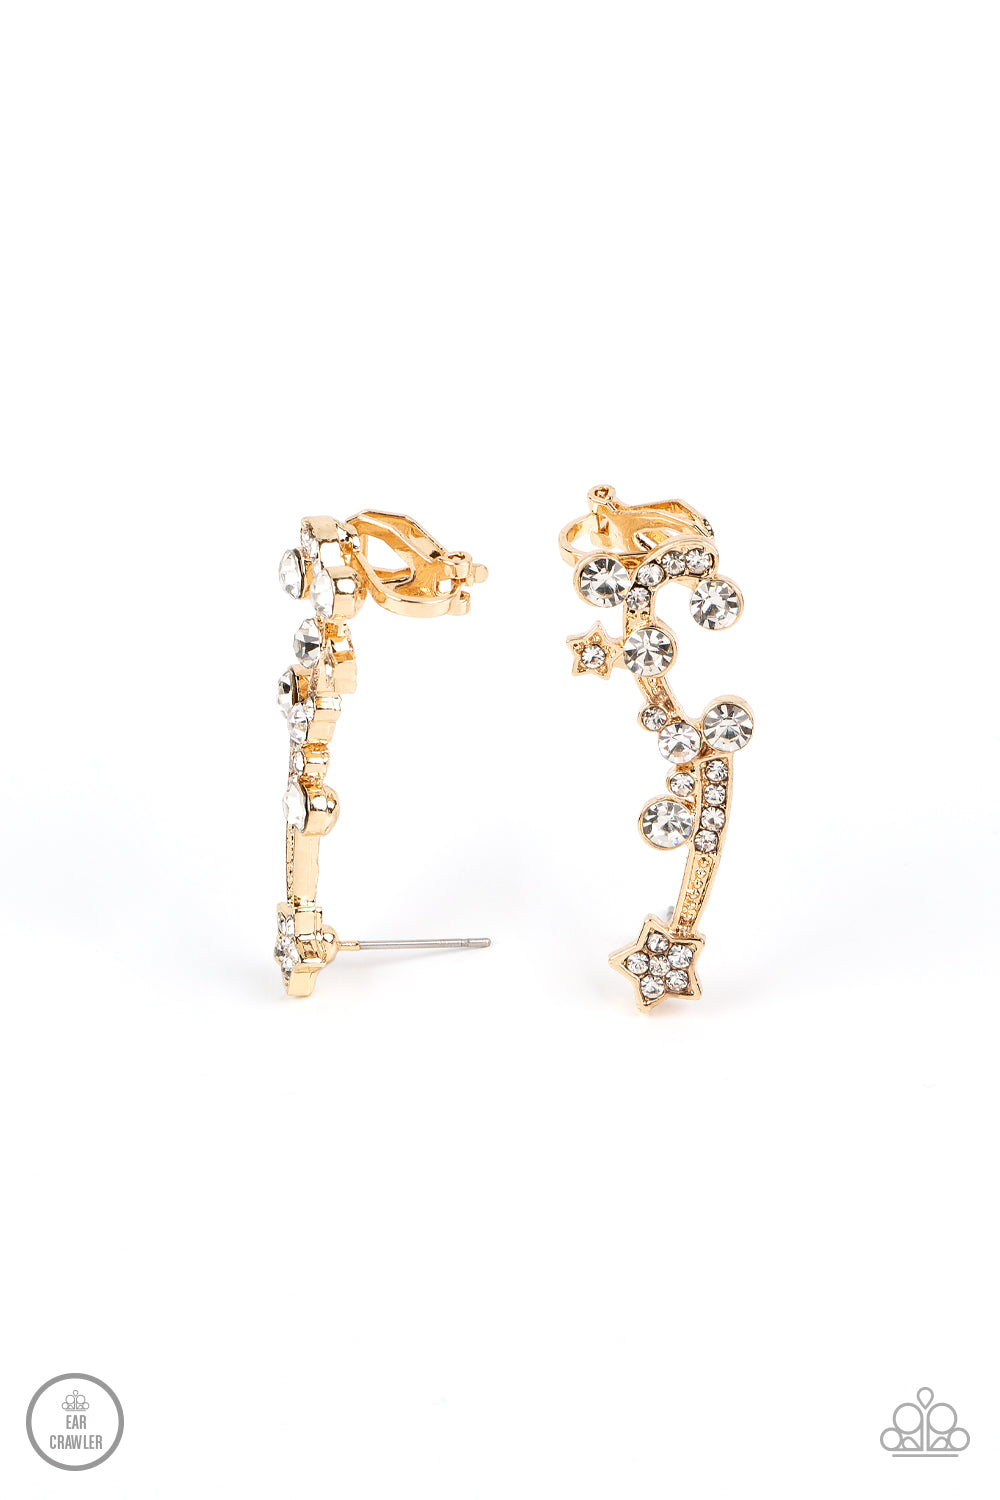 Astral Anthem - gold - Paparazzi earrings